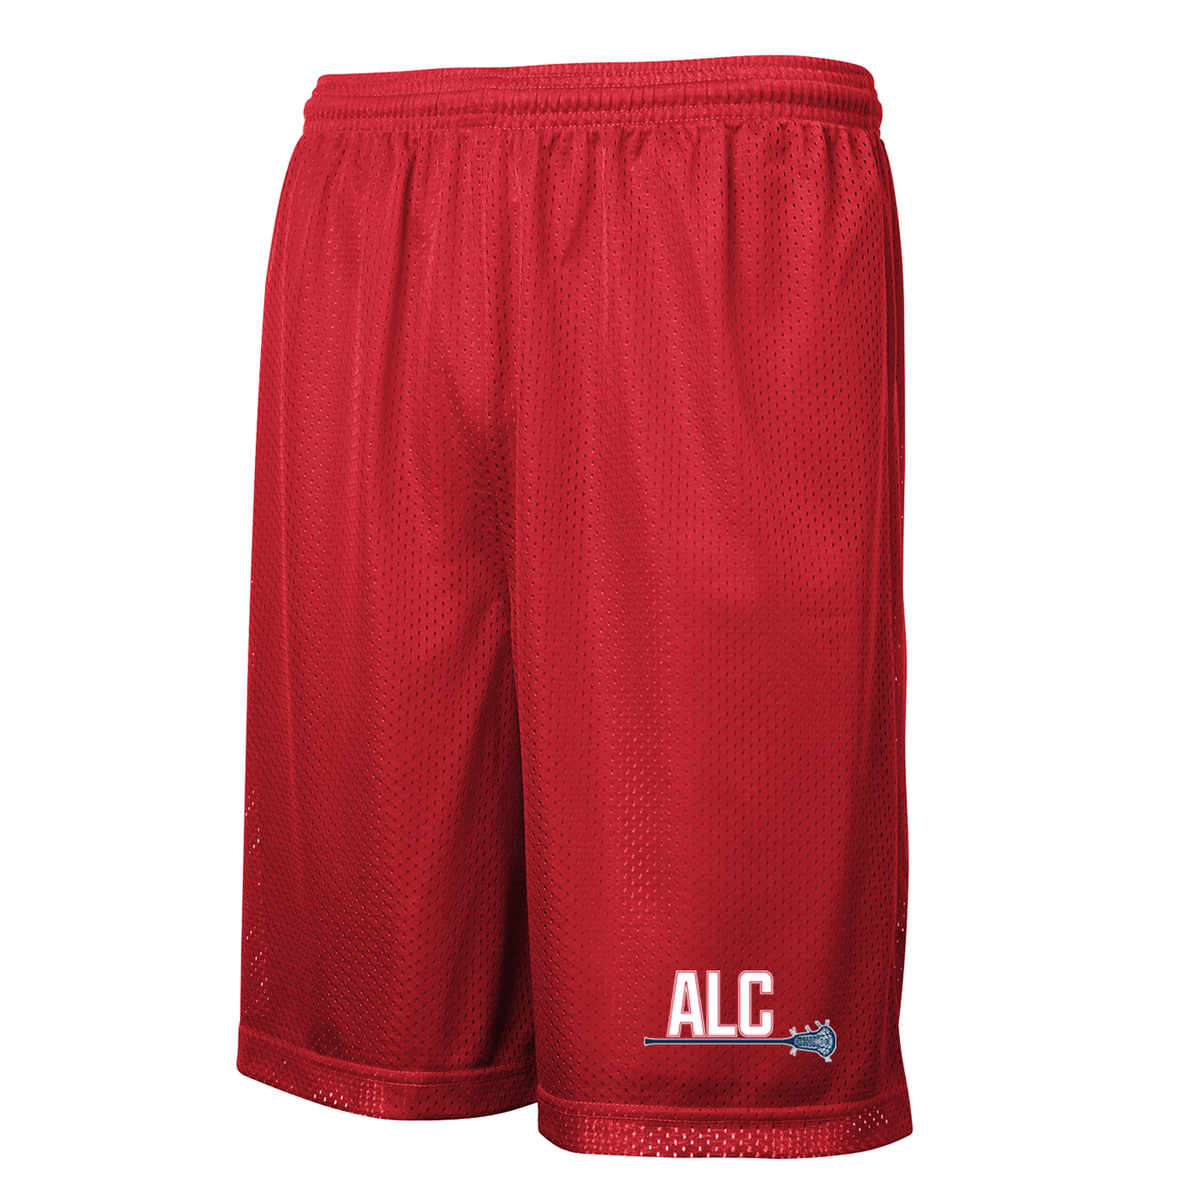 Armonk Lacrosse Club Classic Mesh Shorts (Youth & Adult)